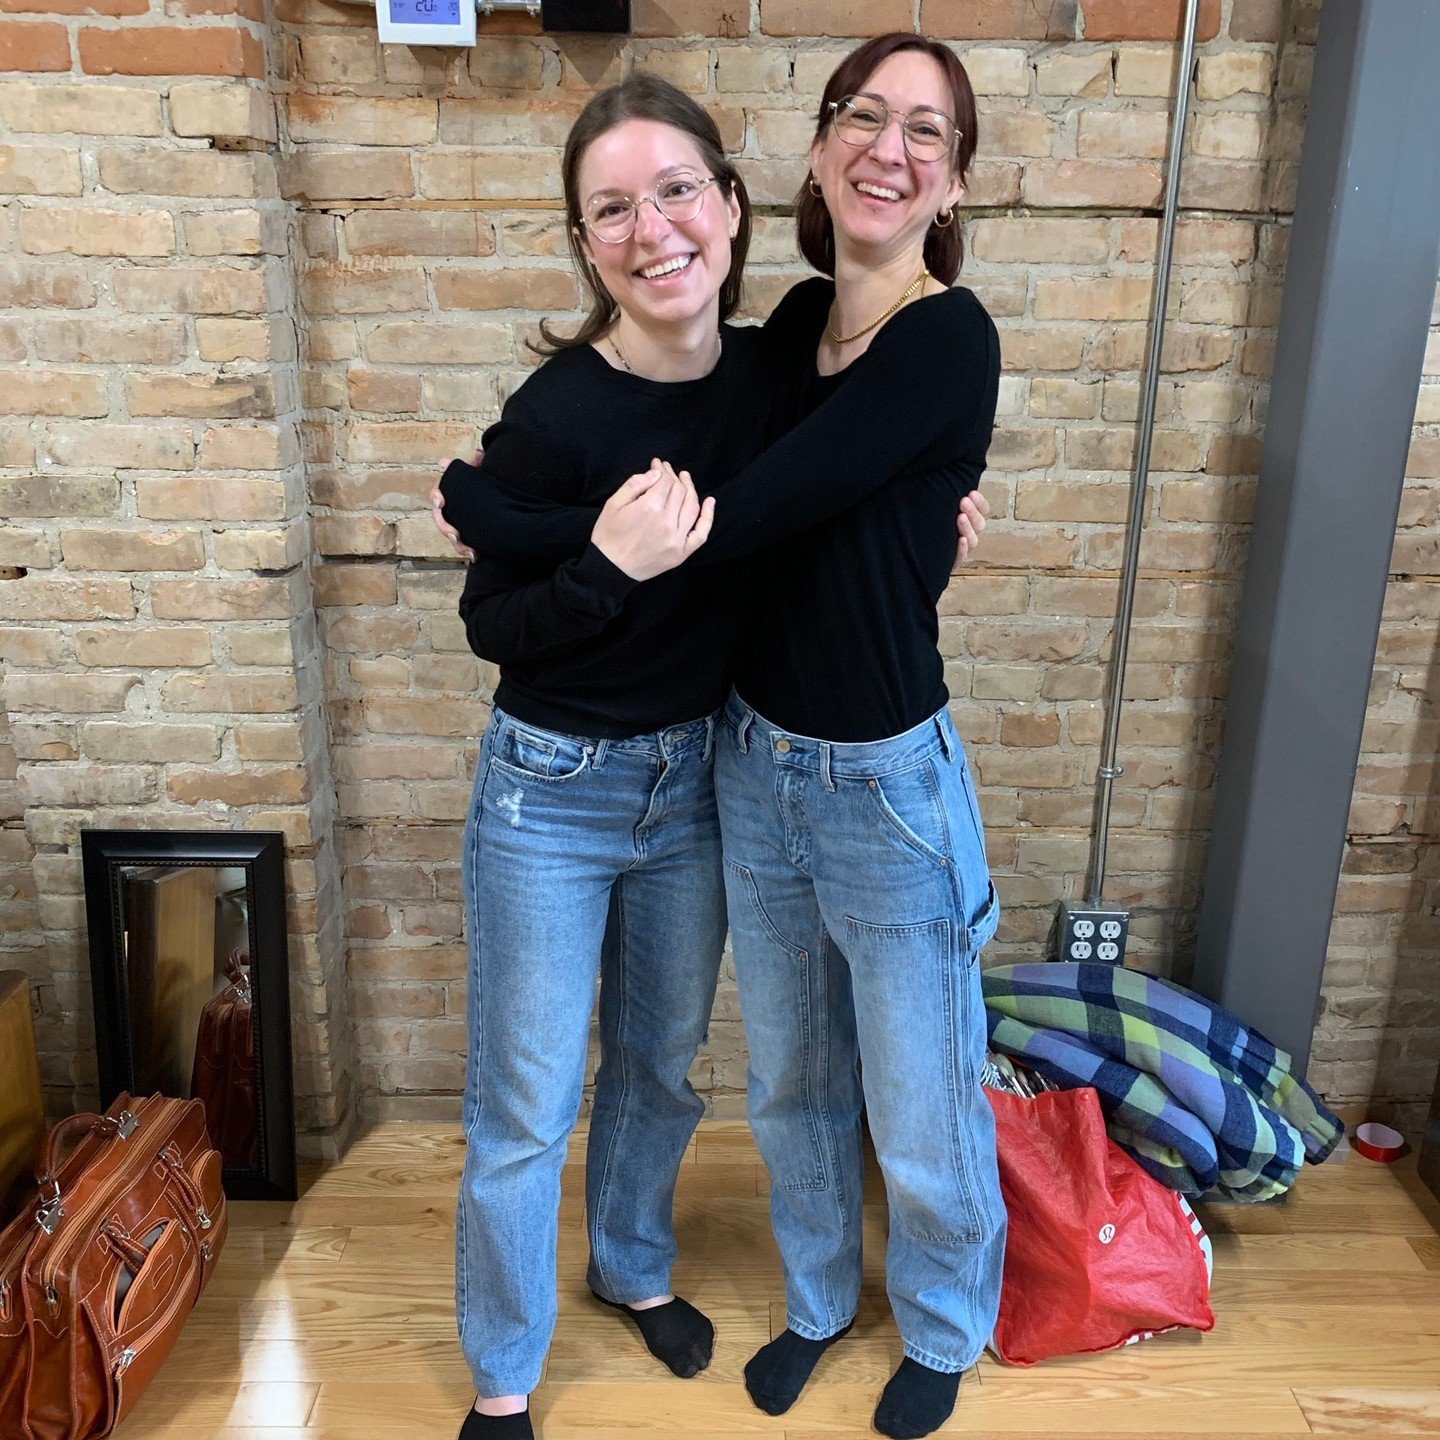 Check out these awesome accidental twinsies, Coaches Robyn and Elizabeth 😍. They're on the same awesome wavelength, rocking those Qi vibes together! 🌟👯 

Woosh! 🎉

#QiBuddies #Twinning #QiVibes #GreatMindsThinkAlike #CreateYouRAwesome #QiWallOfAw